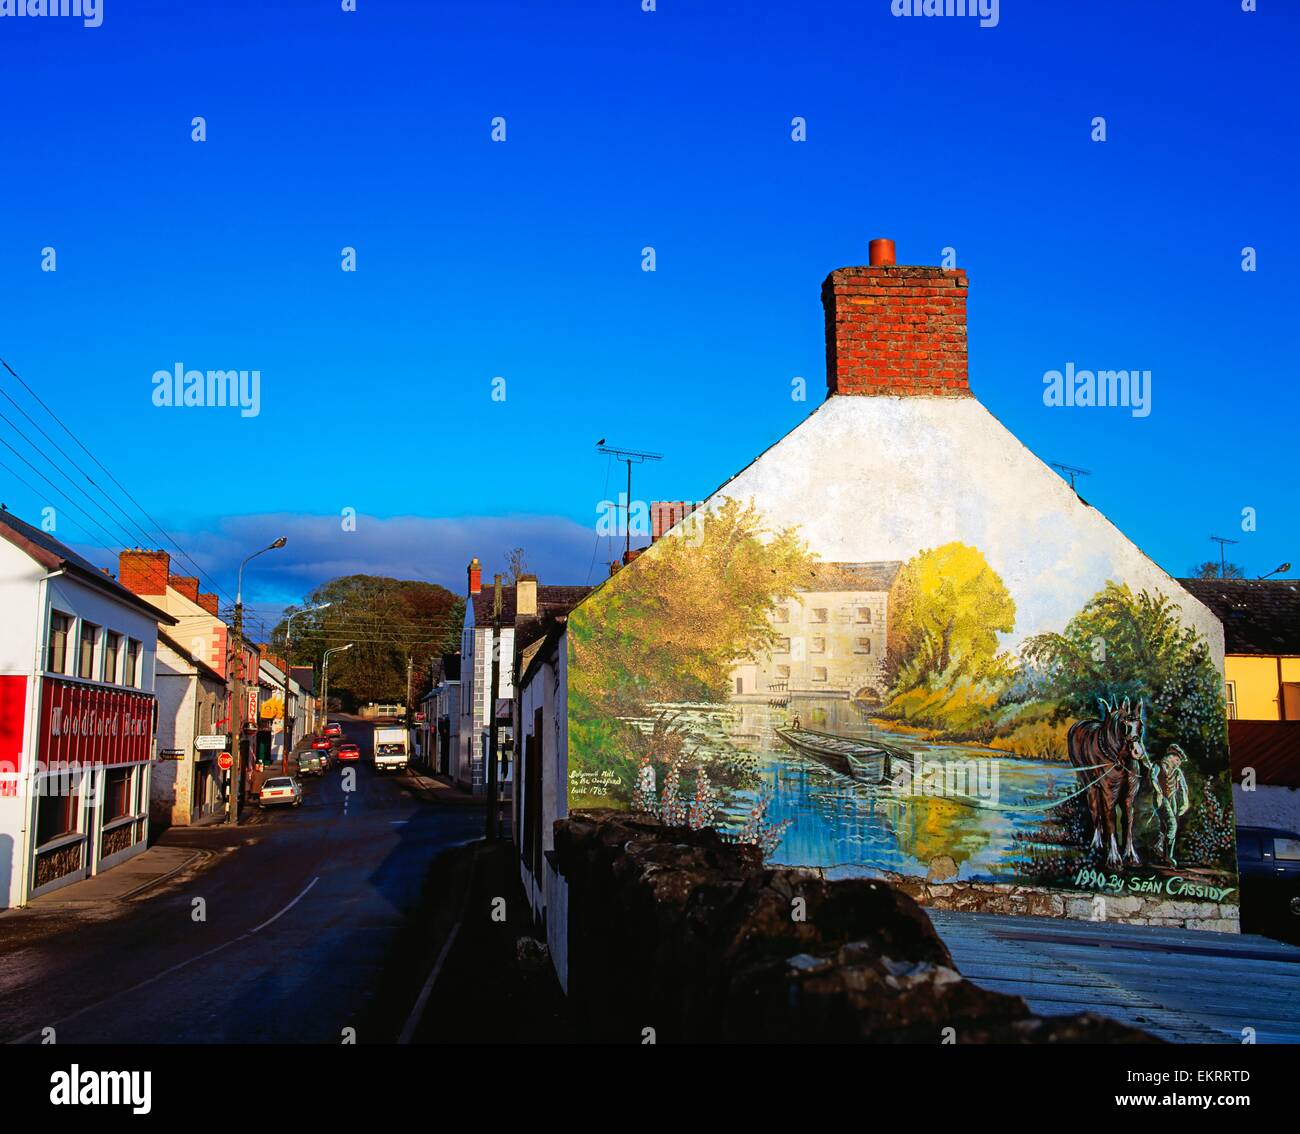 Ballyconnell, Co Cavan, Ireland; Mural On The Side Of A Building Of A Main Street Stock Photo